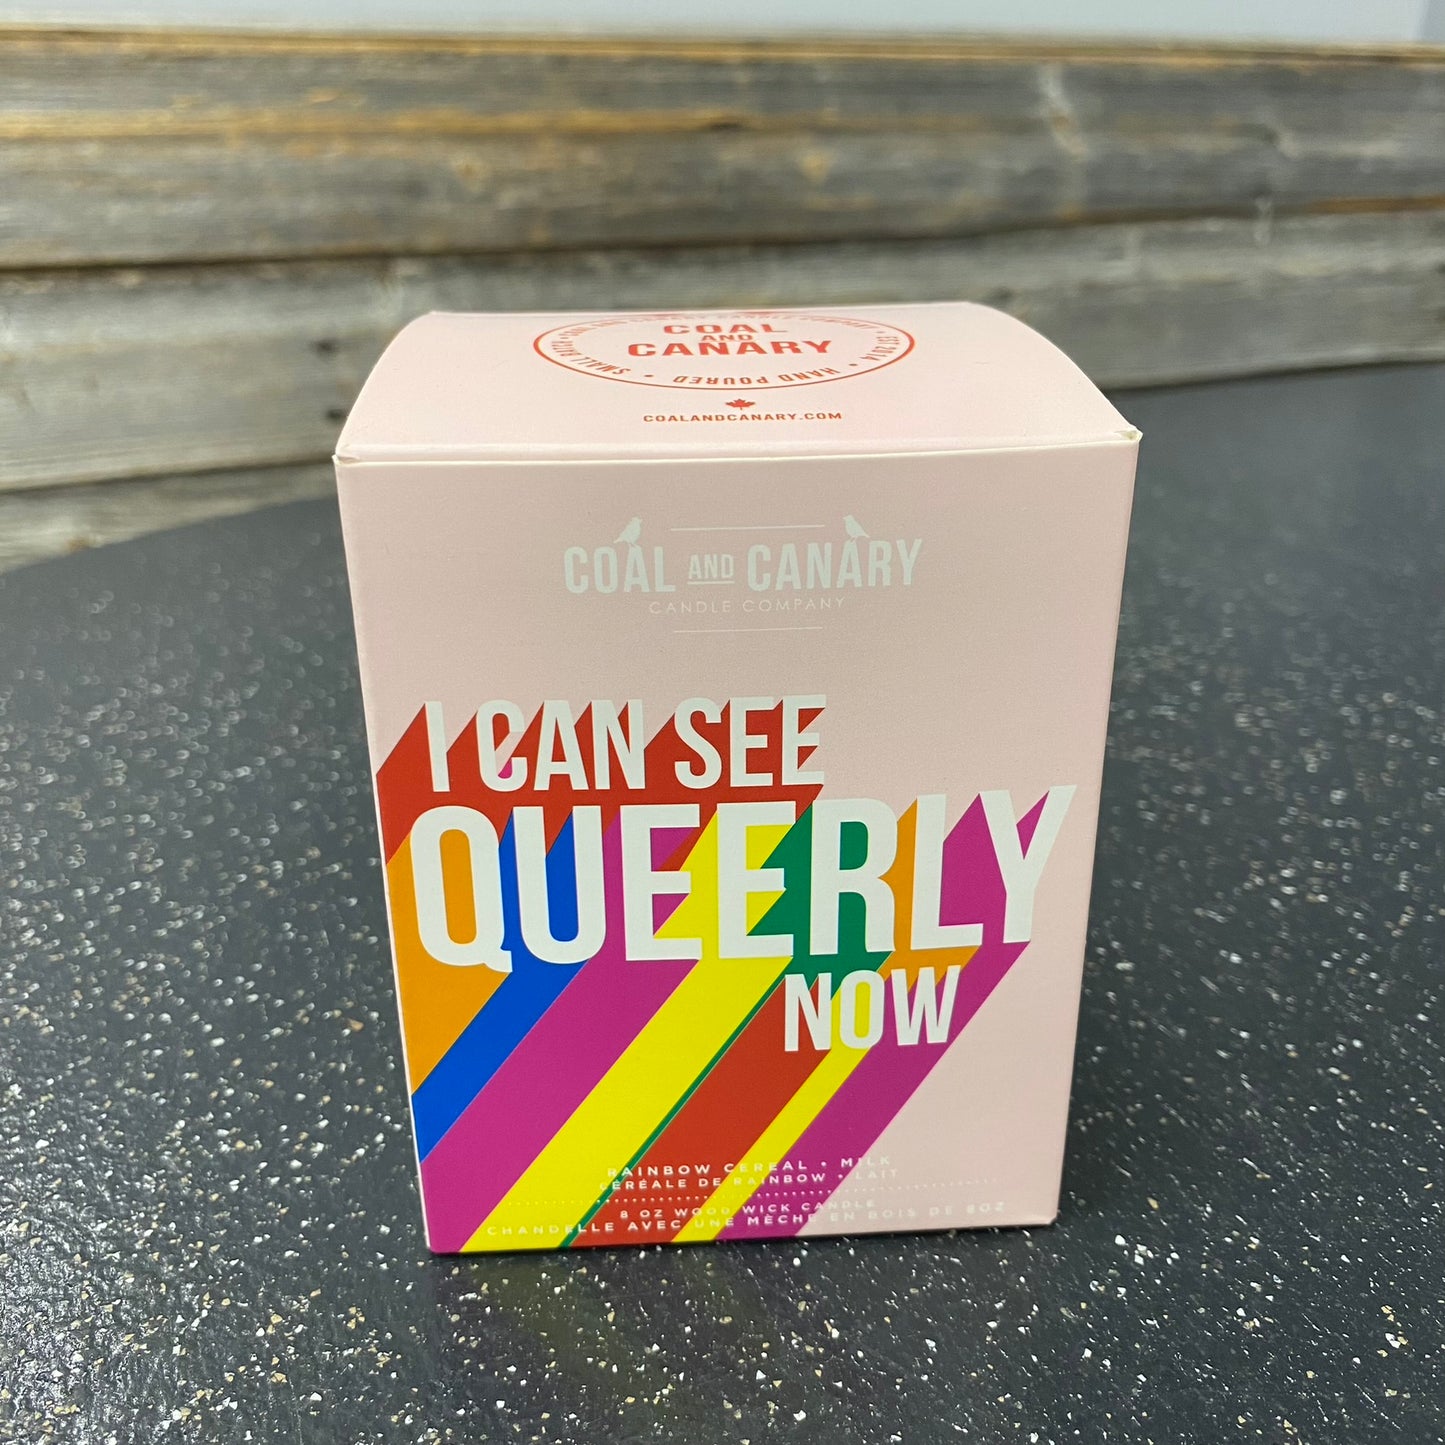 I Can See Queerly Now by Coal & Canary